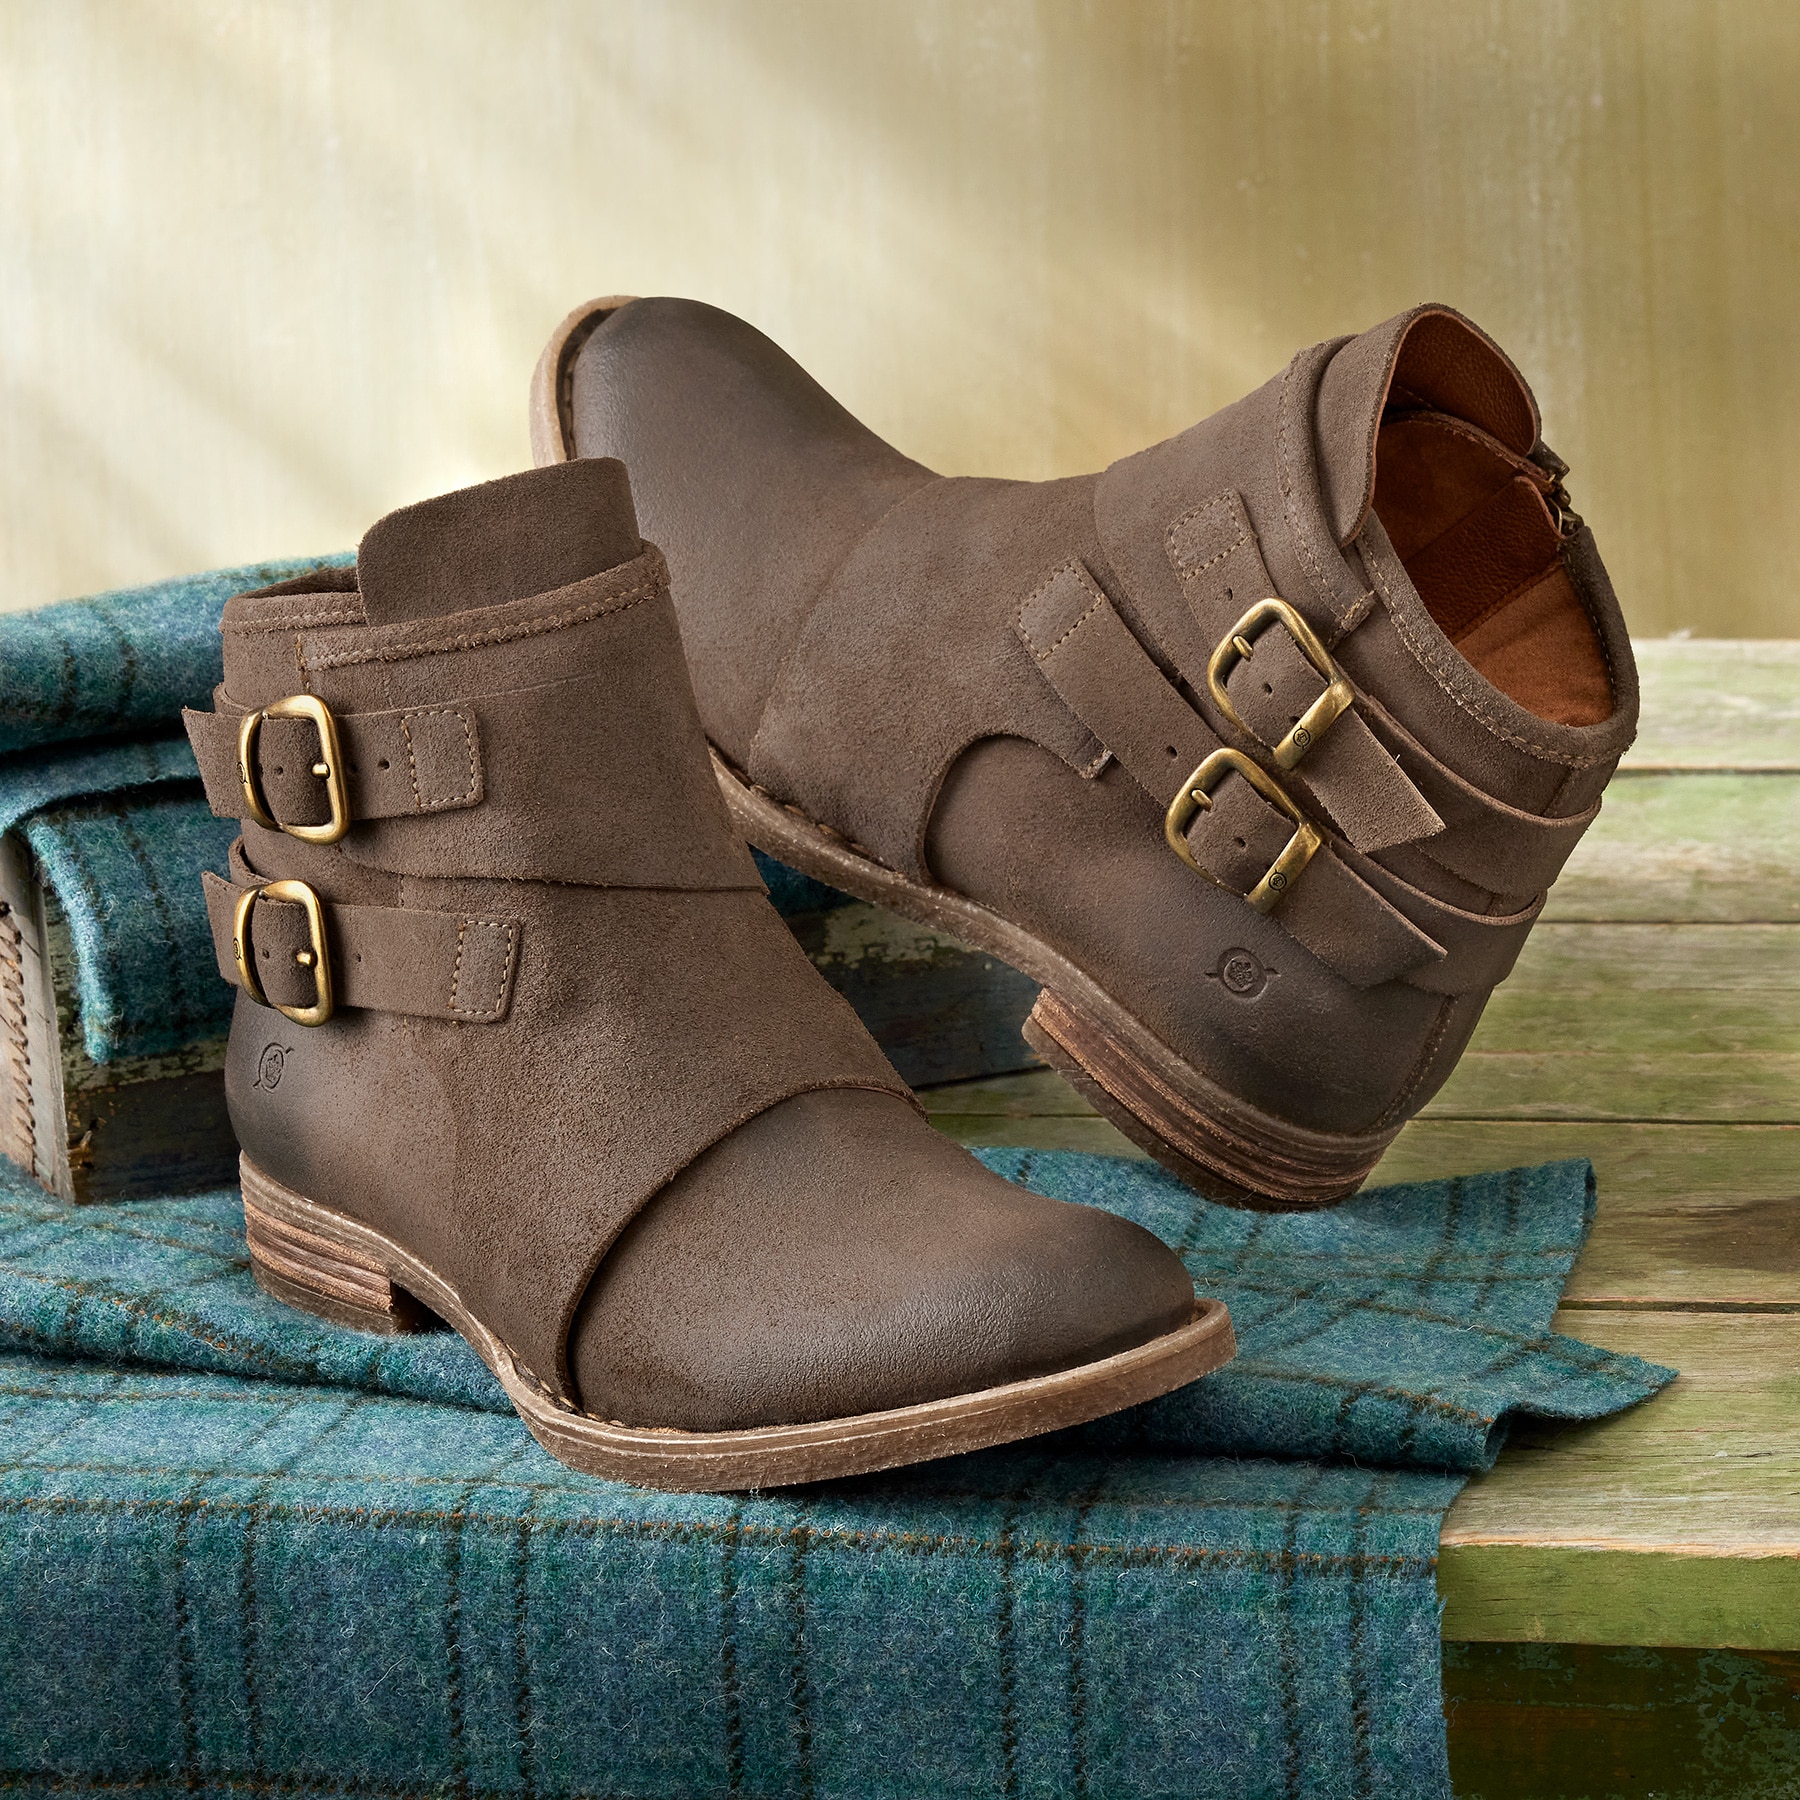 Sundance, Shoes, Sherwood Forest Suede Boots New From Sundance